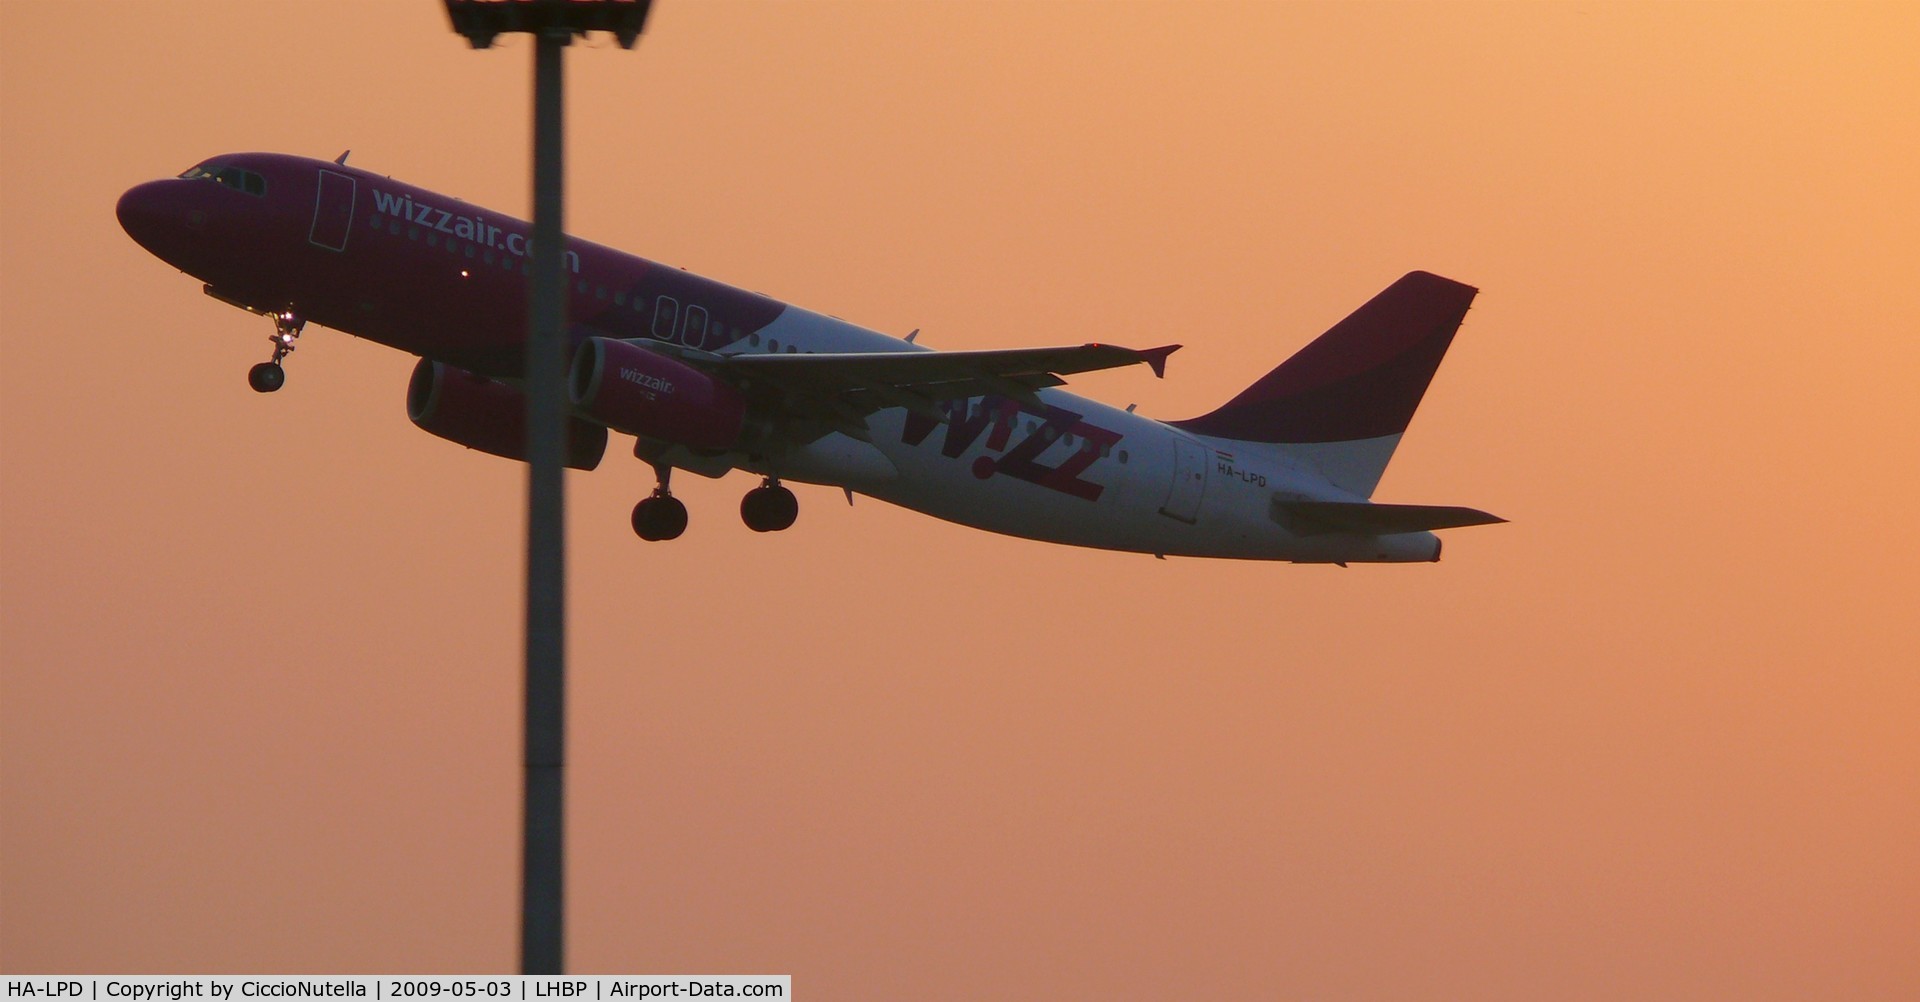 HA-LPD, 2002 Airbus A320-233 C/N 1902, Takeoff of an Airbus A320 WizzAir from Budapest early in the morning